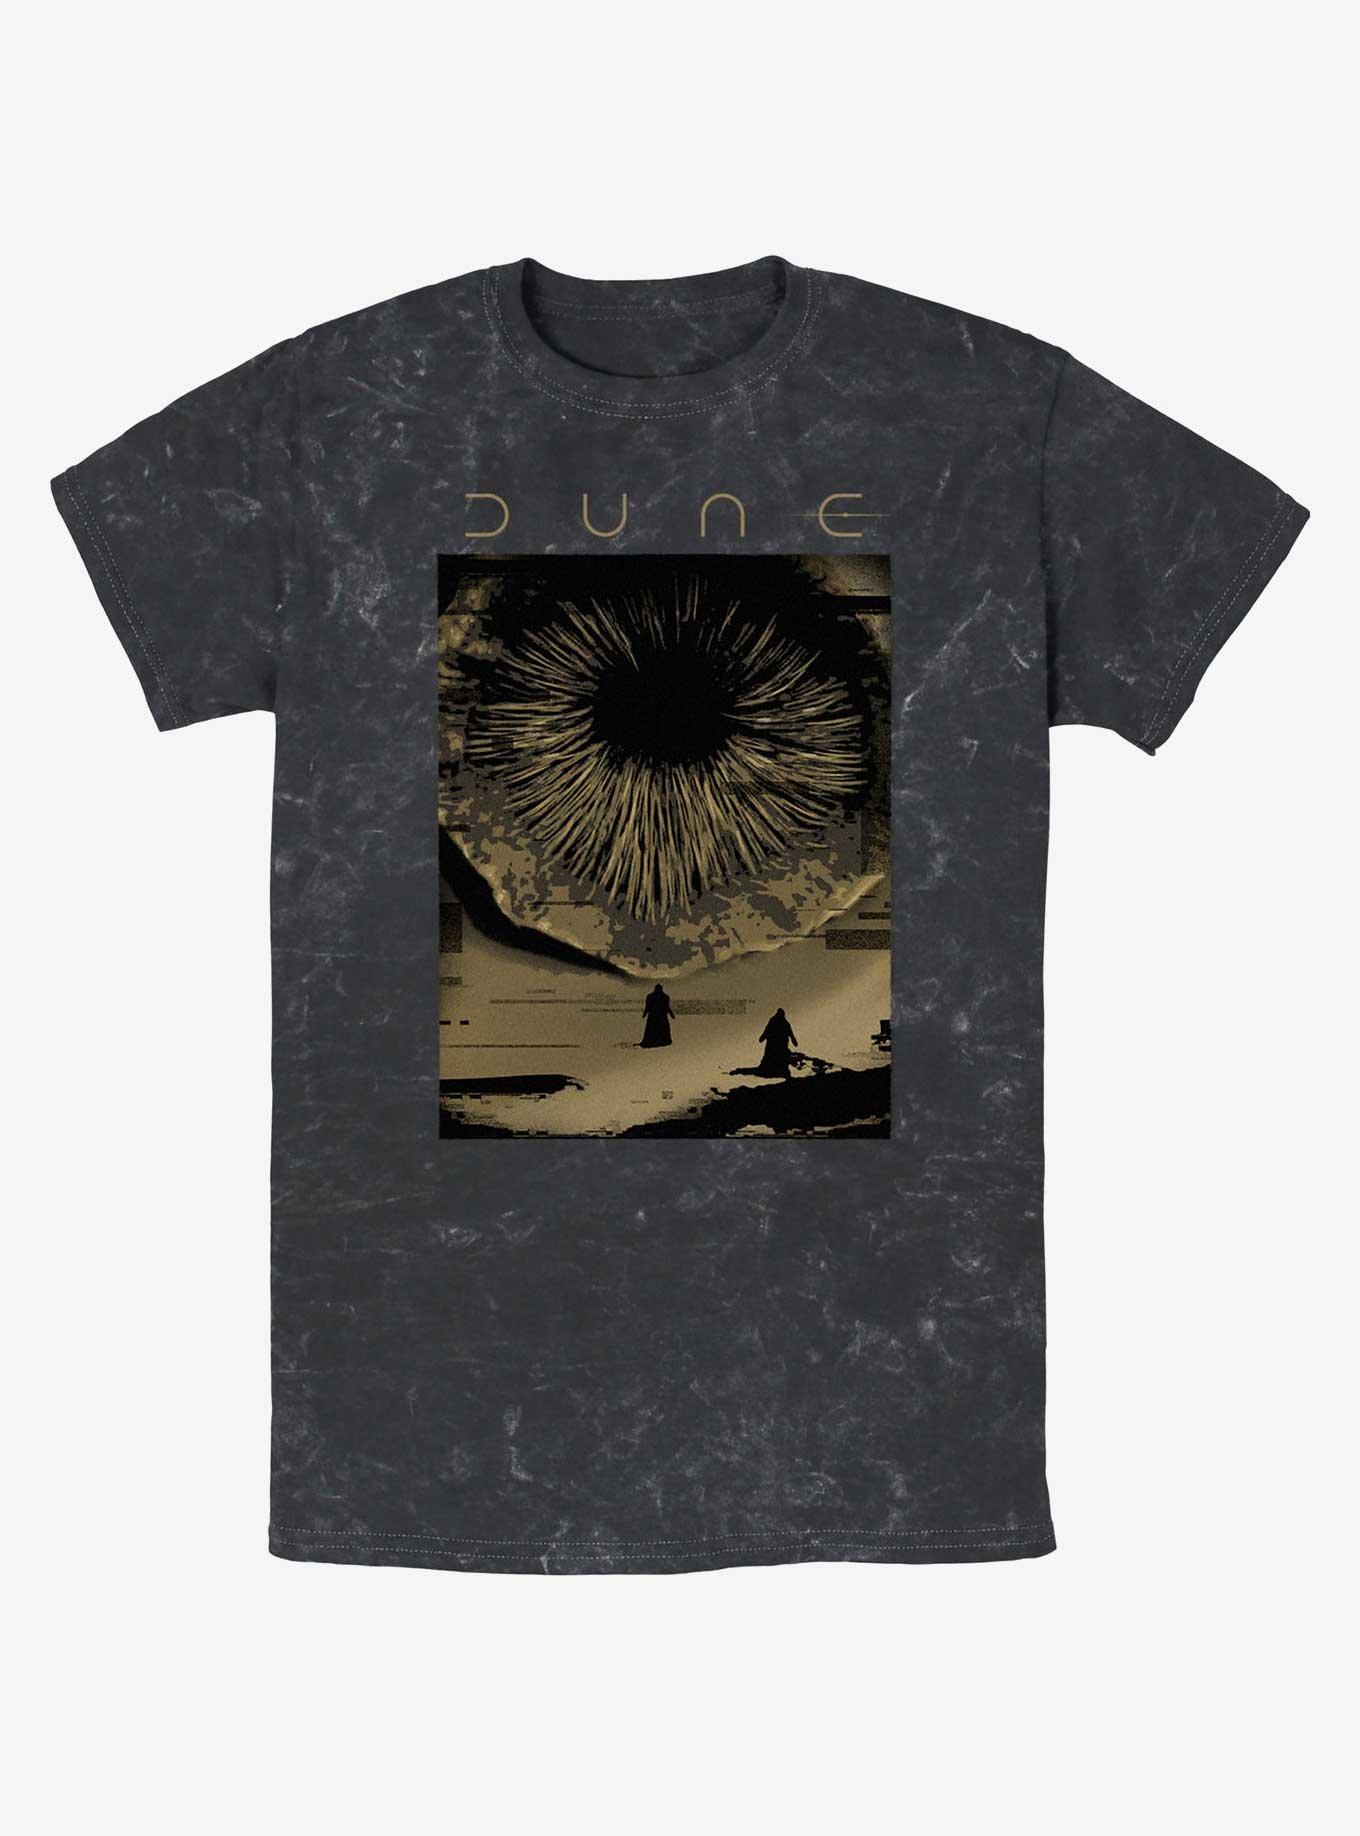 Dune: Part Two Shai-Hulud Poster Mineral Wash T-Shirt, BLACK, hi-res